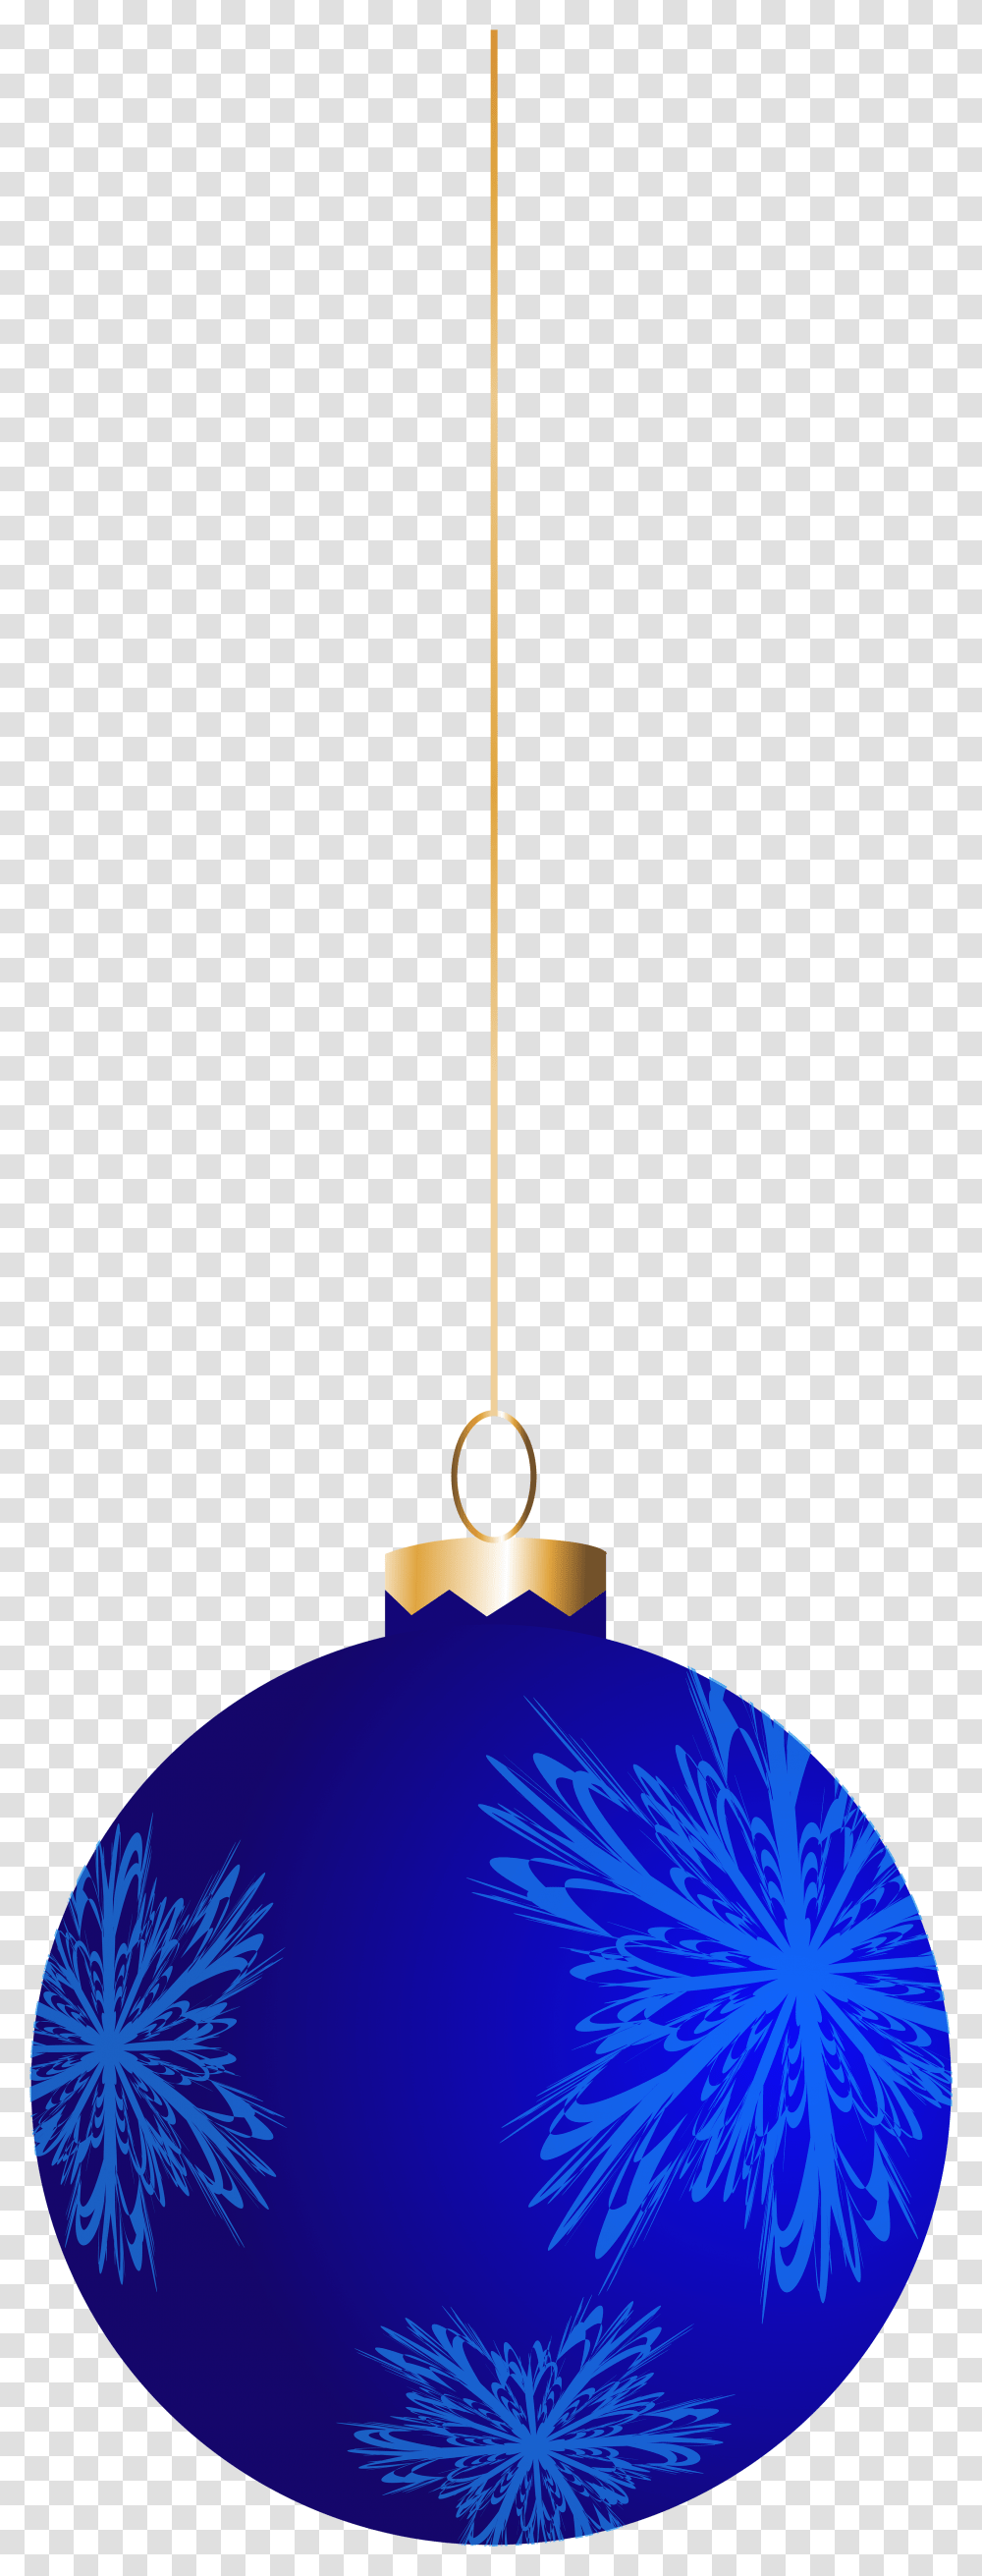 Download Hd Blue Christmas Balls Christmas Clipart Tree Blue, Lamp, Light Fixture, Lampshade, Ceiling Light Transparent Png